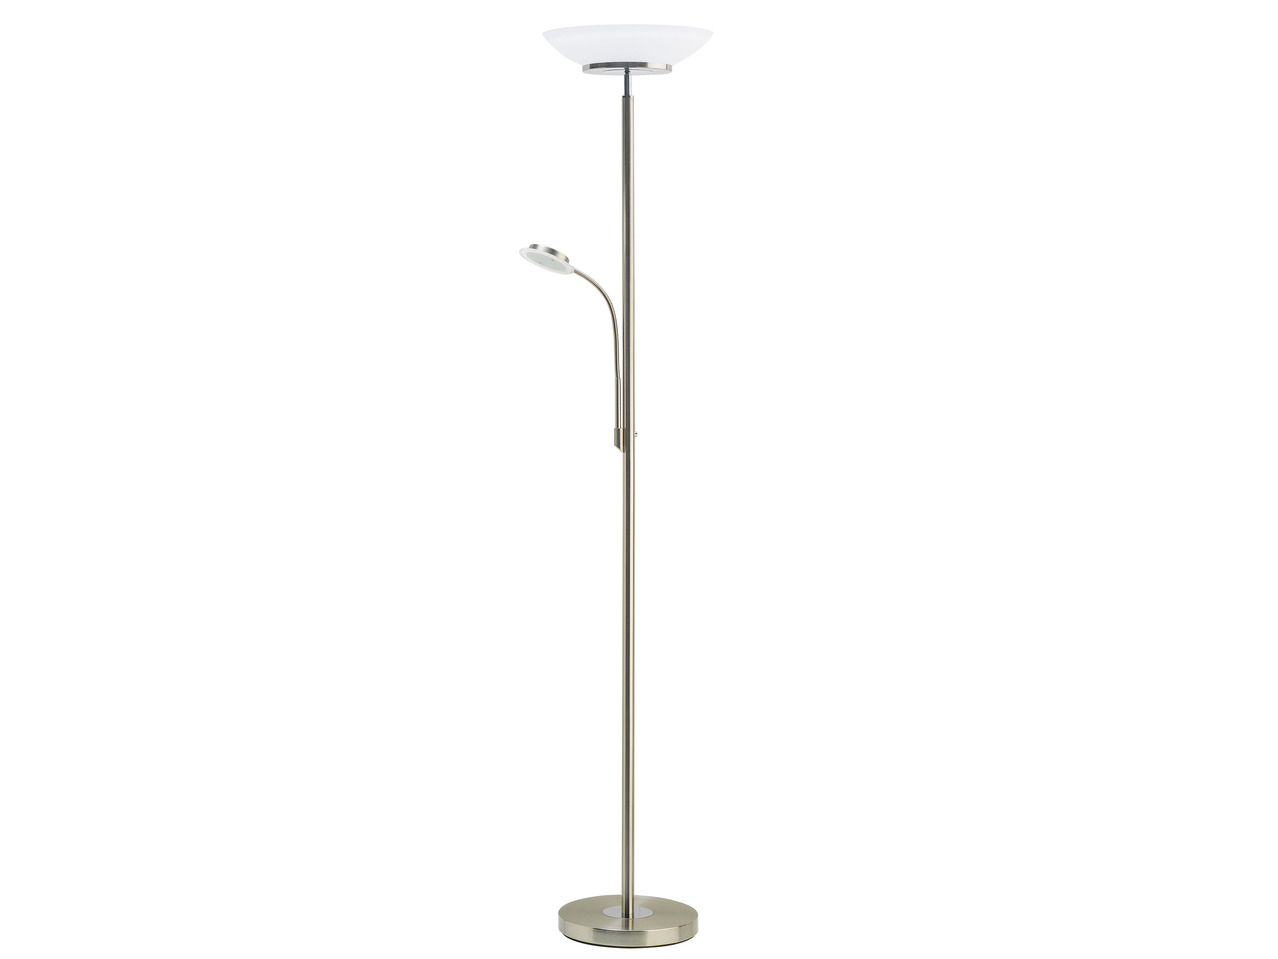 Livarno Lux Father And Child Uplighter Led Floor Lamp Lidl for sizing 1278 X 959